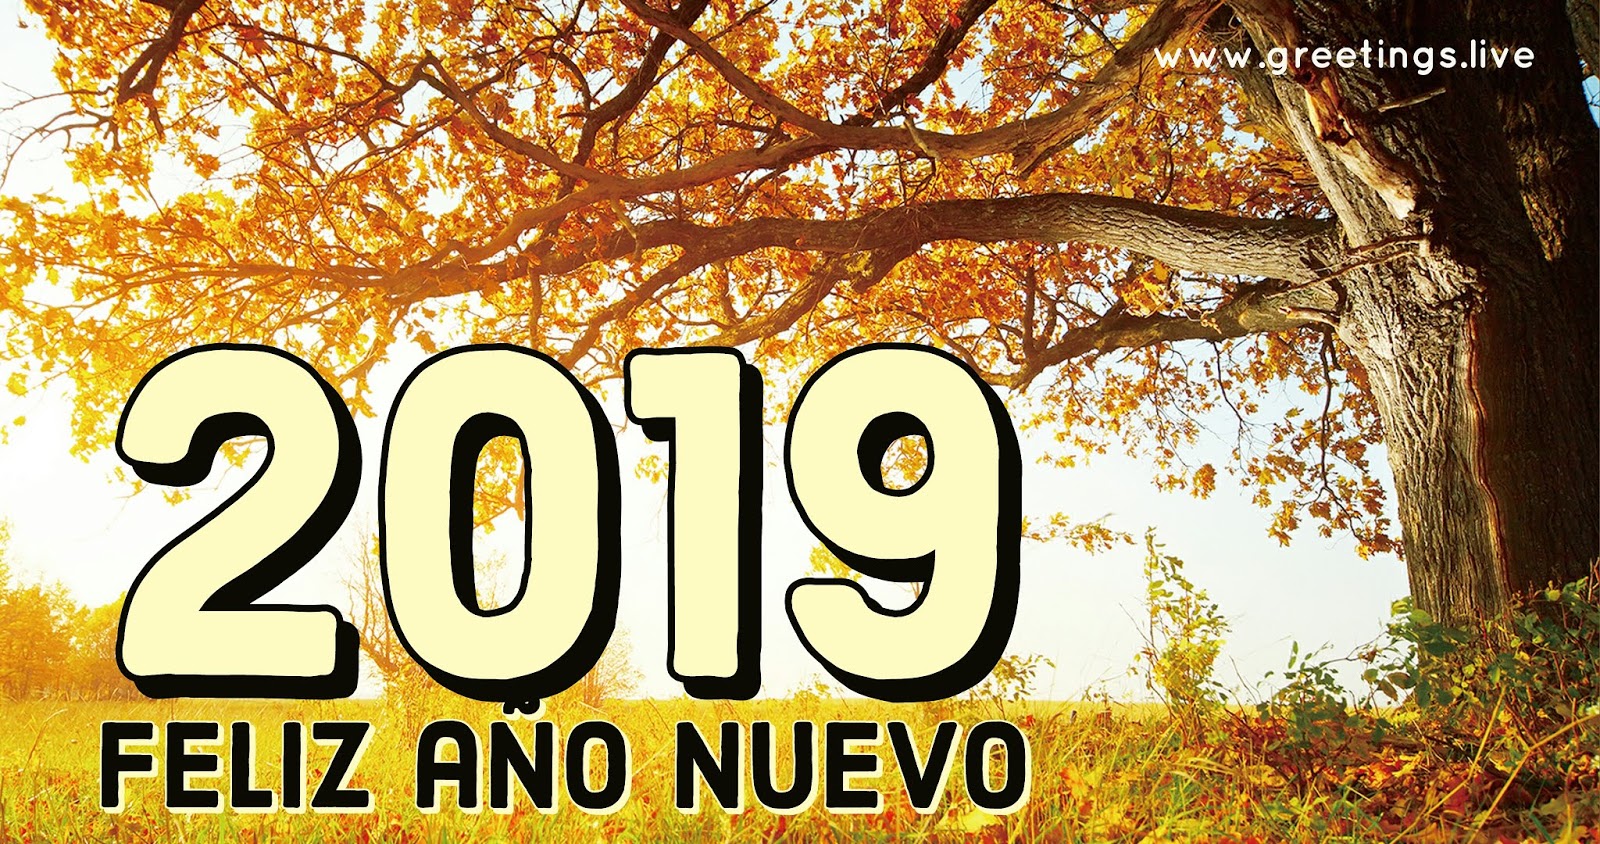 Greetings Live Free Daily Greetings Pictures Festival Gif Images 19 Happy New Year In Spanish Language